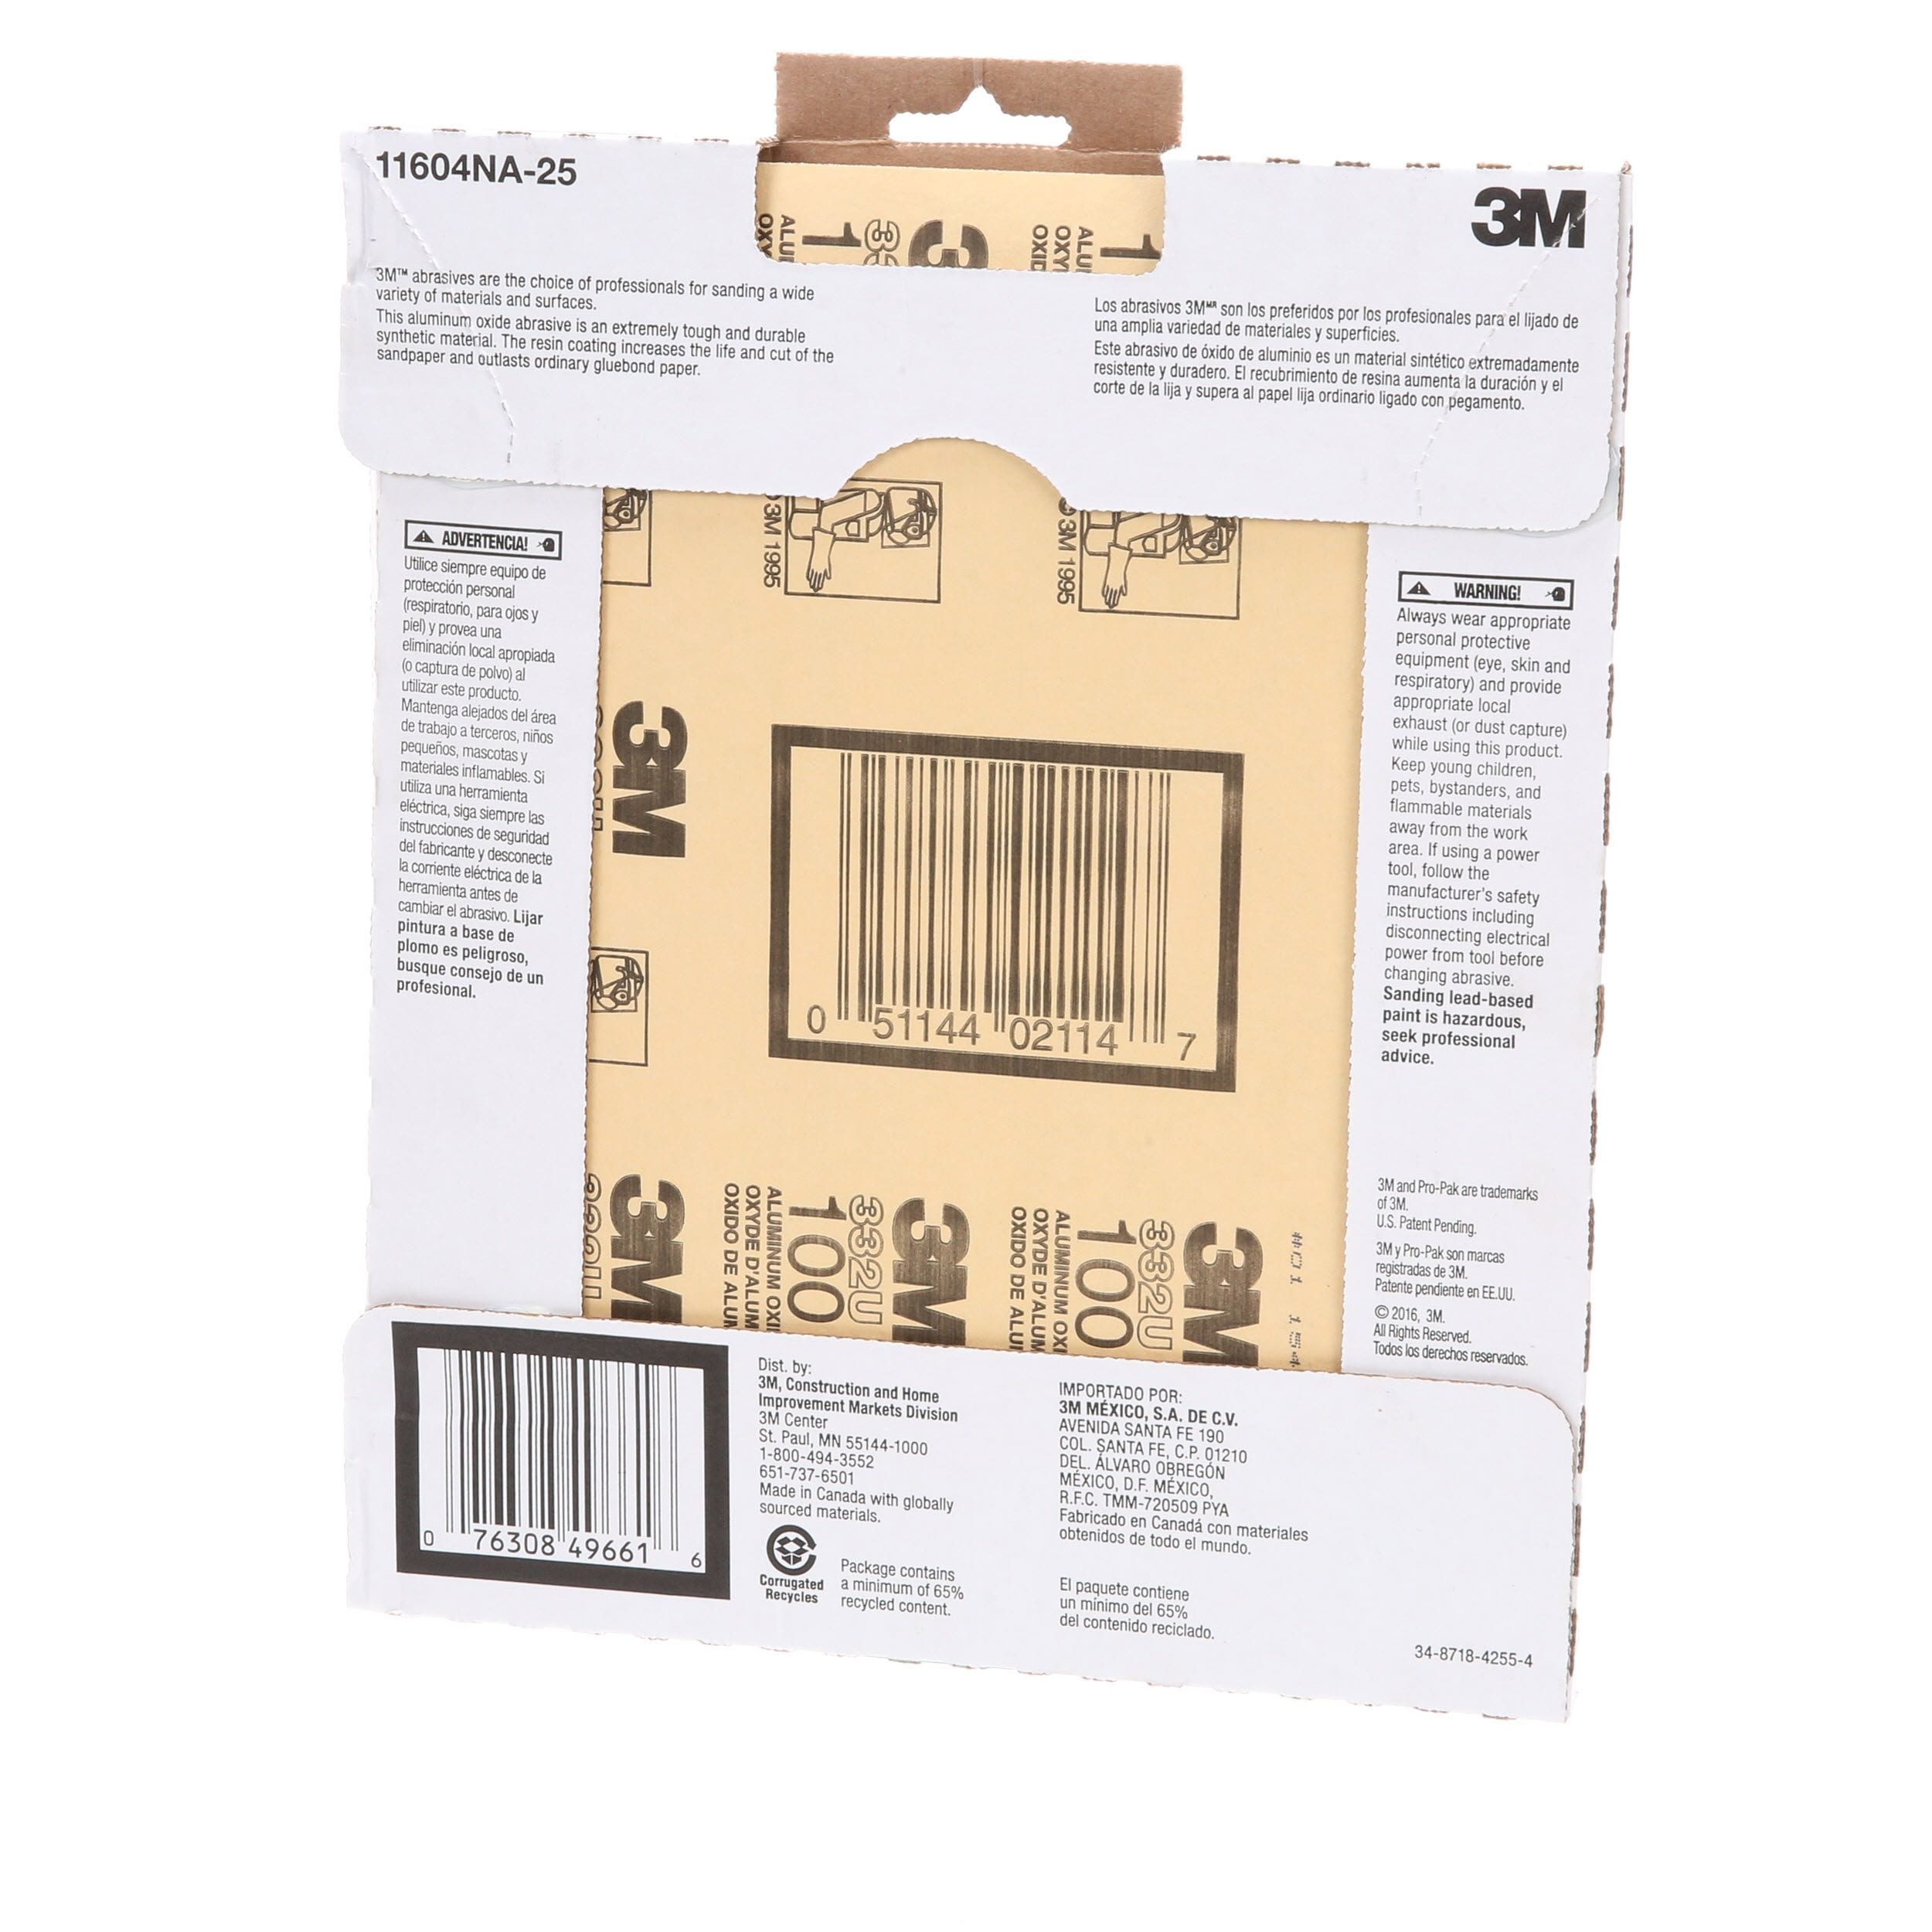 99404NA 100-Grit 3M Pro-Oak Aluminum Oxide Sandpaper for Paint and Rust Removal 9 in x 11 in 25 sheets per pack 